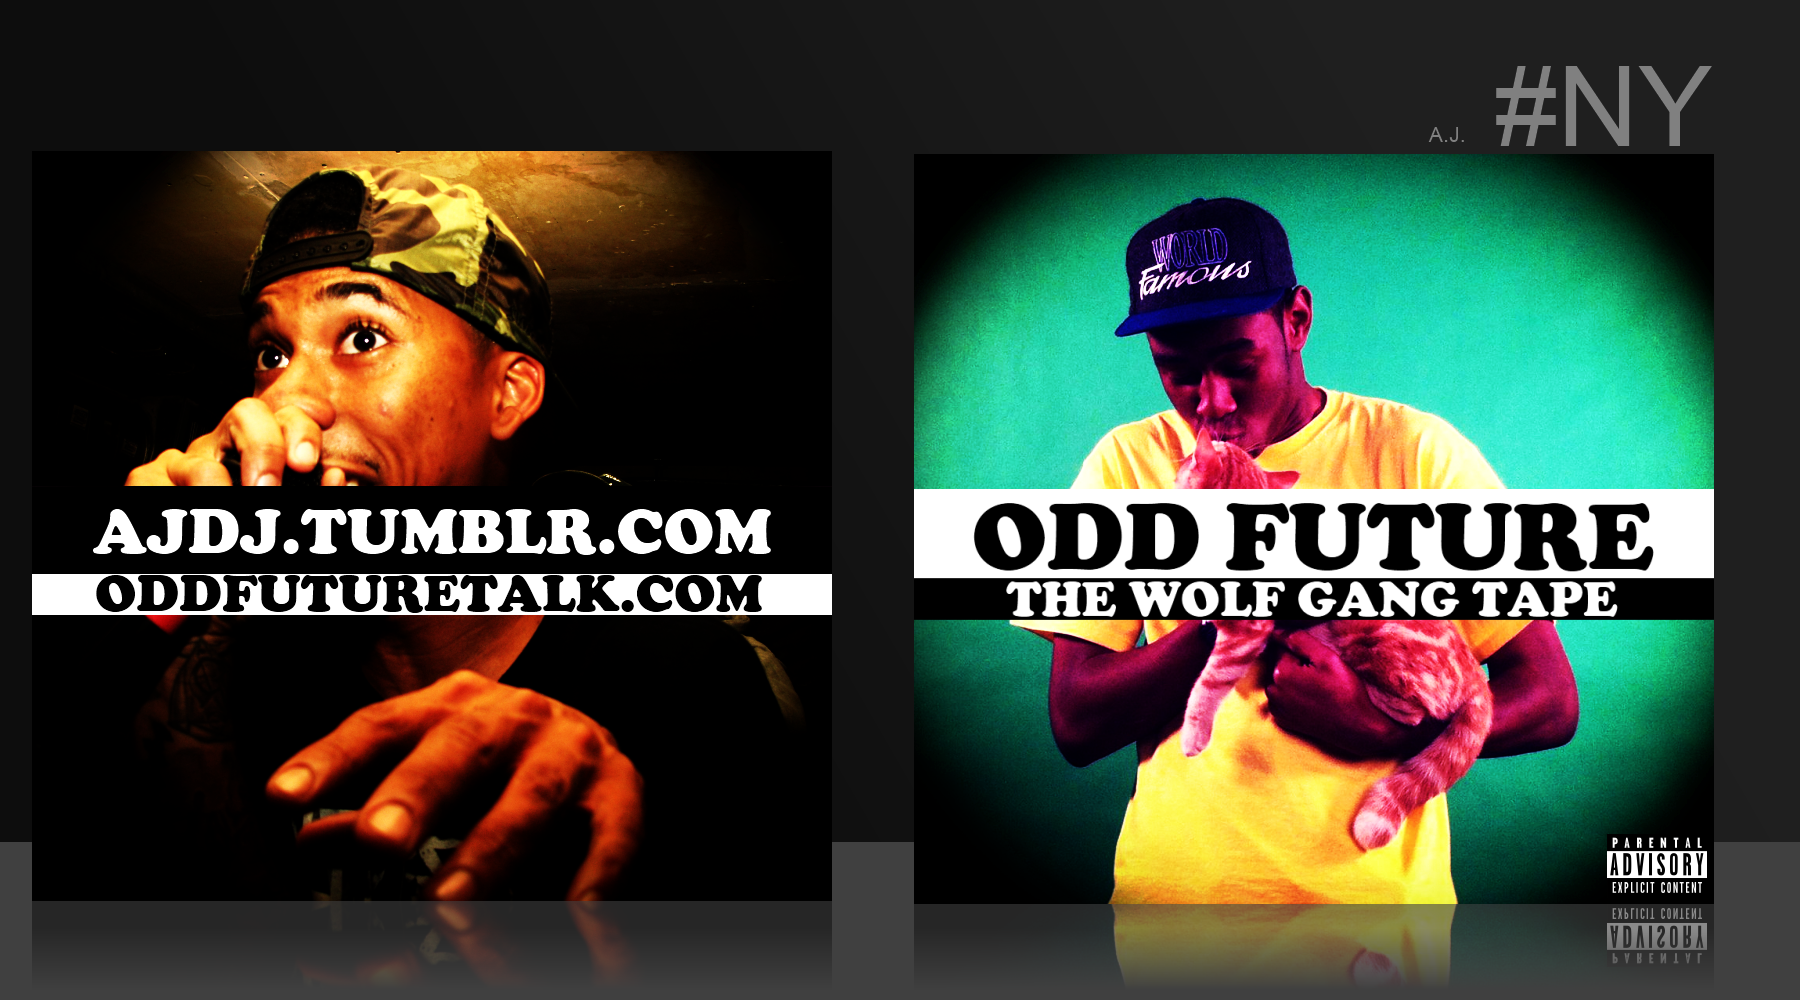 Odd Future: The Wolf Gang Tape box cover